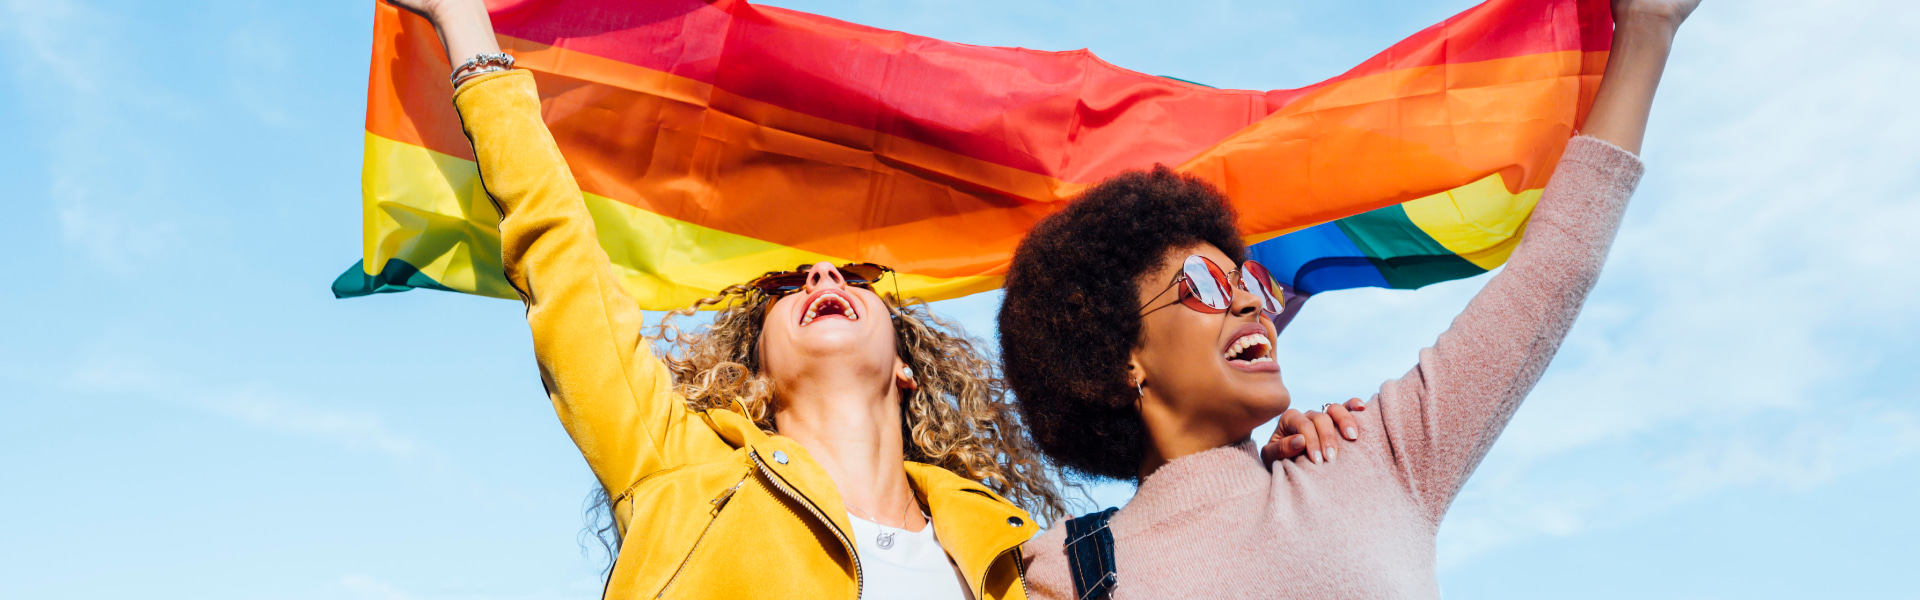 two women holding up a pride flag outdoors with a beautiful blue sky in the background